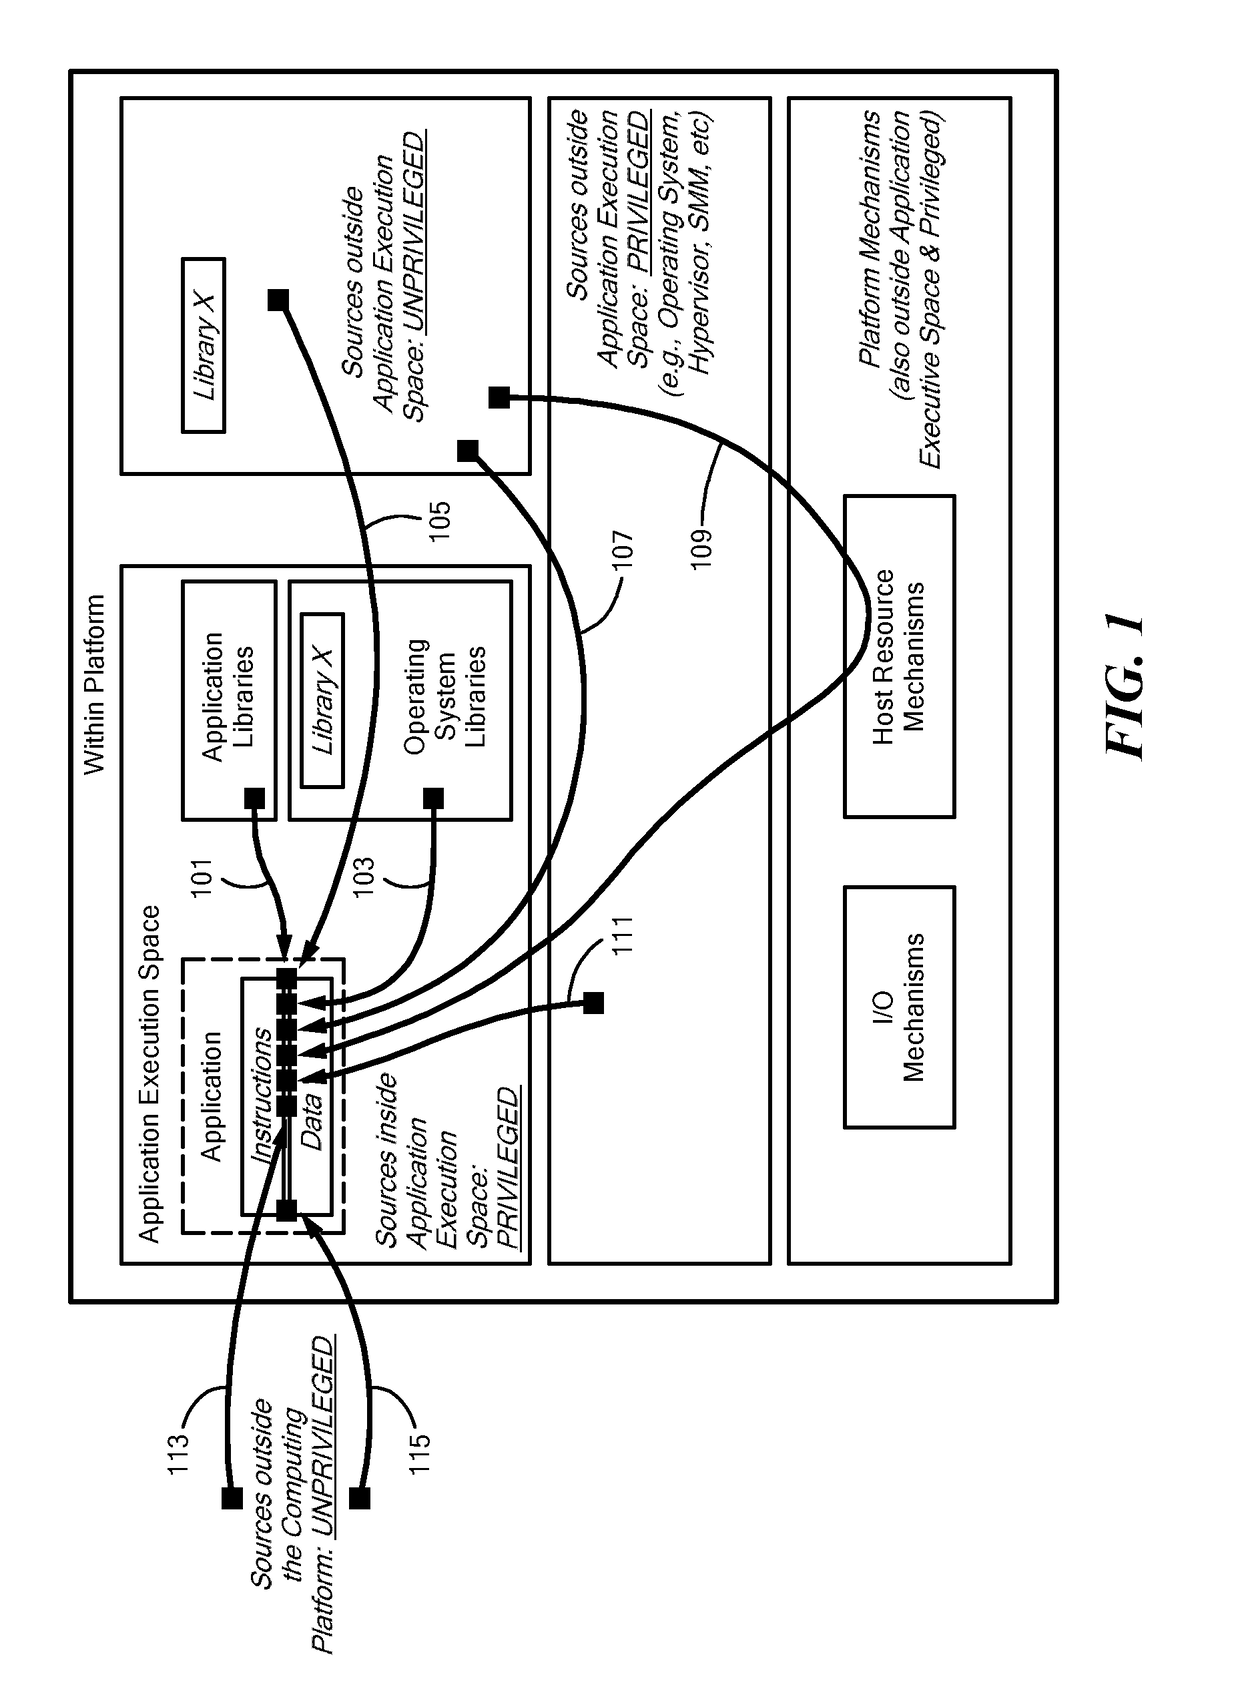 Method and Apparatus for Trusted Execution of Applications